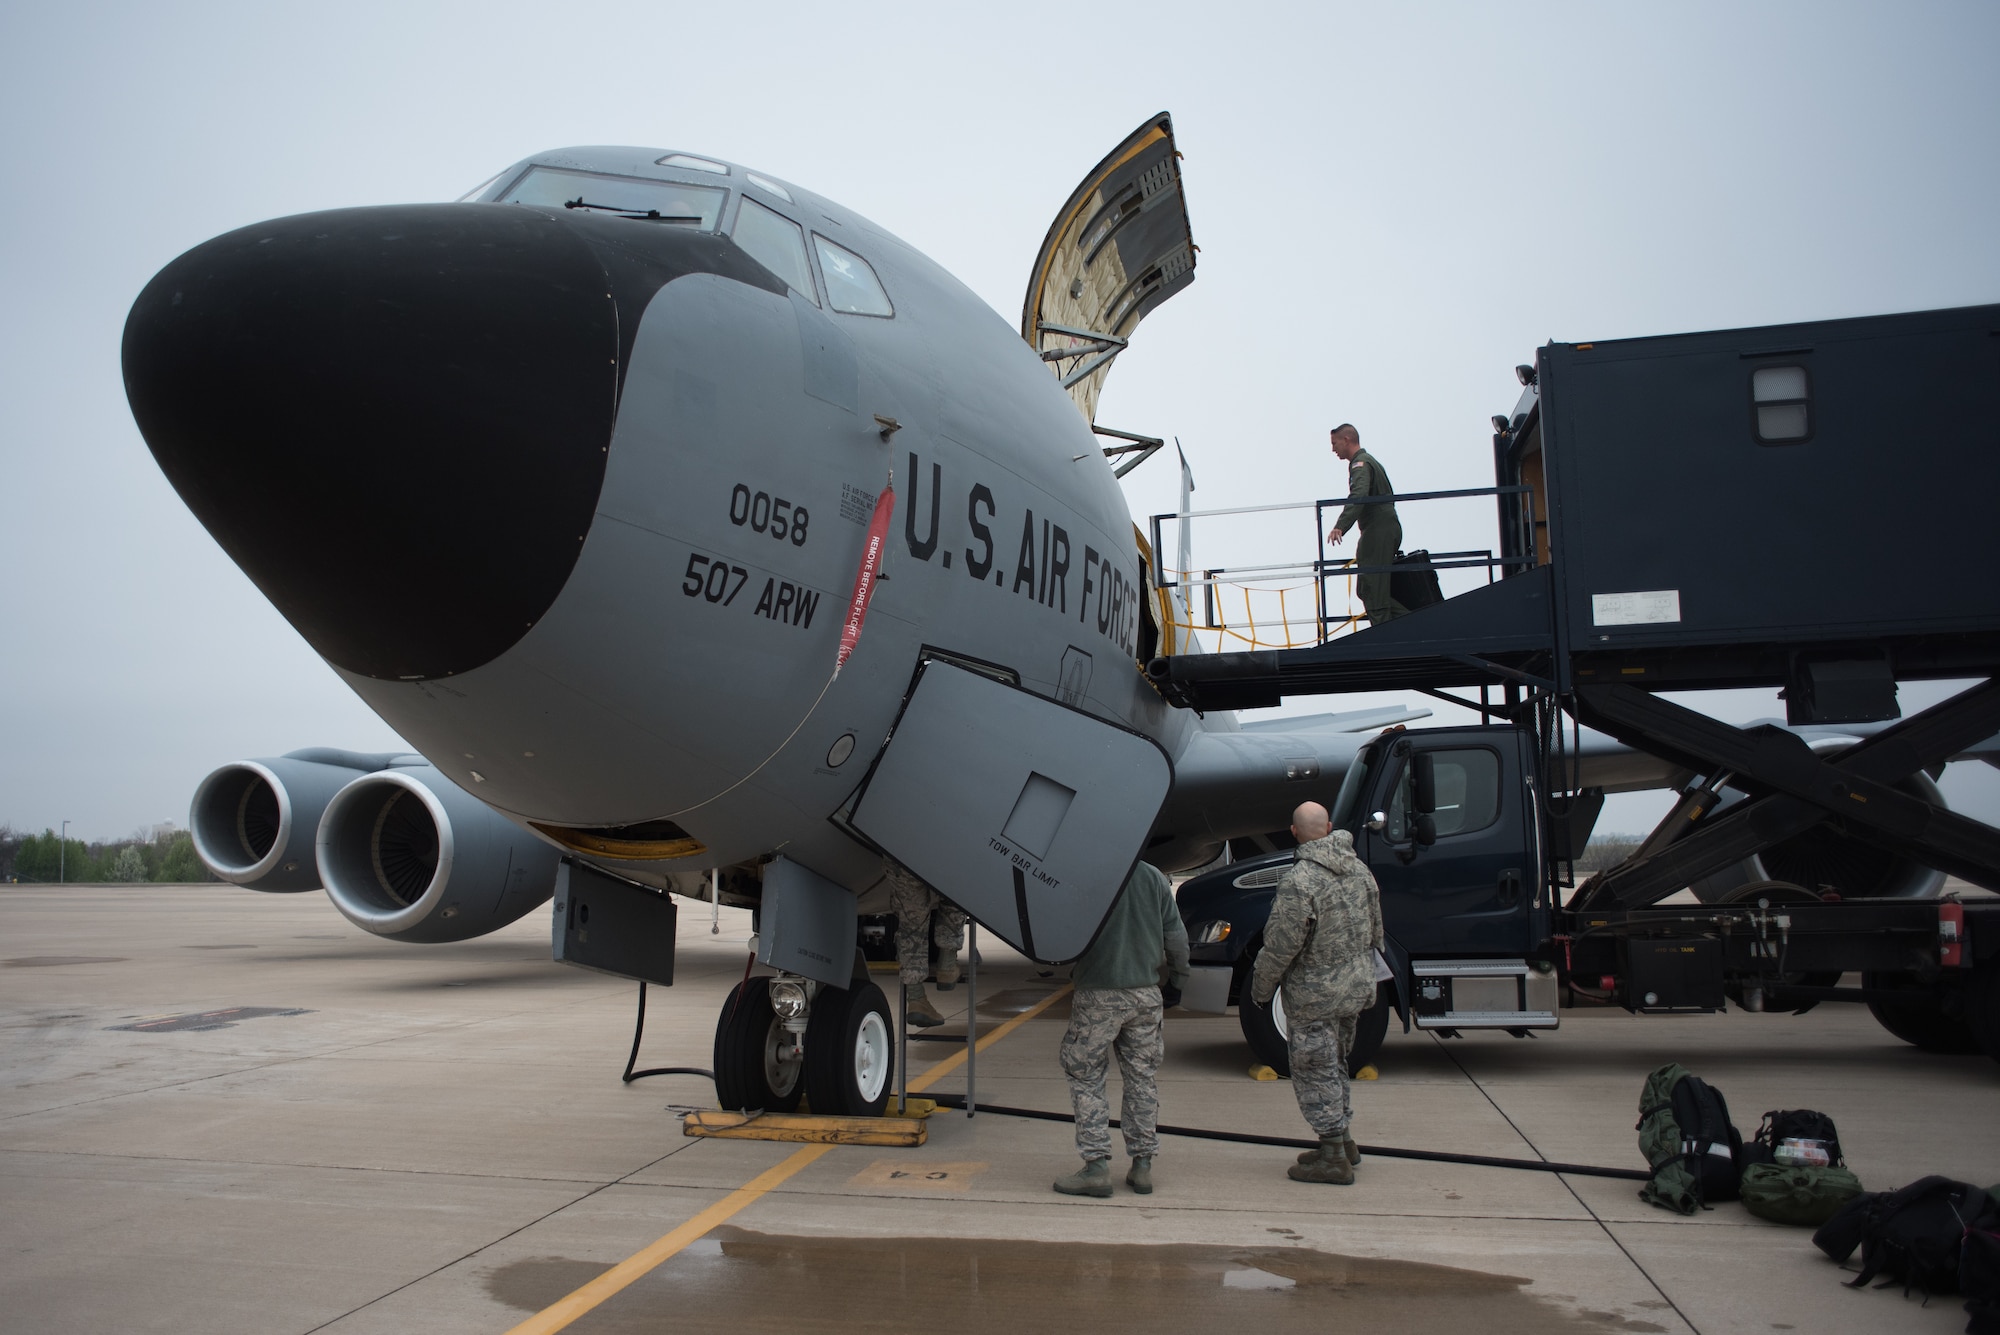 Aeromedical evacuation squadron members from five Air National Guard units load medical equipment on a KC-135 Stratotanker, from the 507th Air Refueling Wing, Tinker Air Force Base, Oklahoma, before completing in-flight training scenarios at Tinker Air Force Base near Oklahoma City, March 27, 2018. The Multiple Aircraft Training Opportunity Program (MATOP) was created by the 137th Aeromedical Evacuation Squadron from Will Rogers Air National Guard Base in Oklahoma City in 2012. (U.S. Air National Guard photo by Staff Sgt. Tyler Woodward)